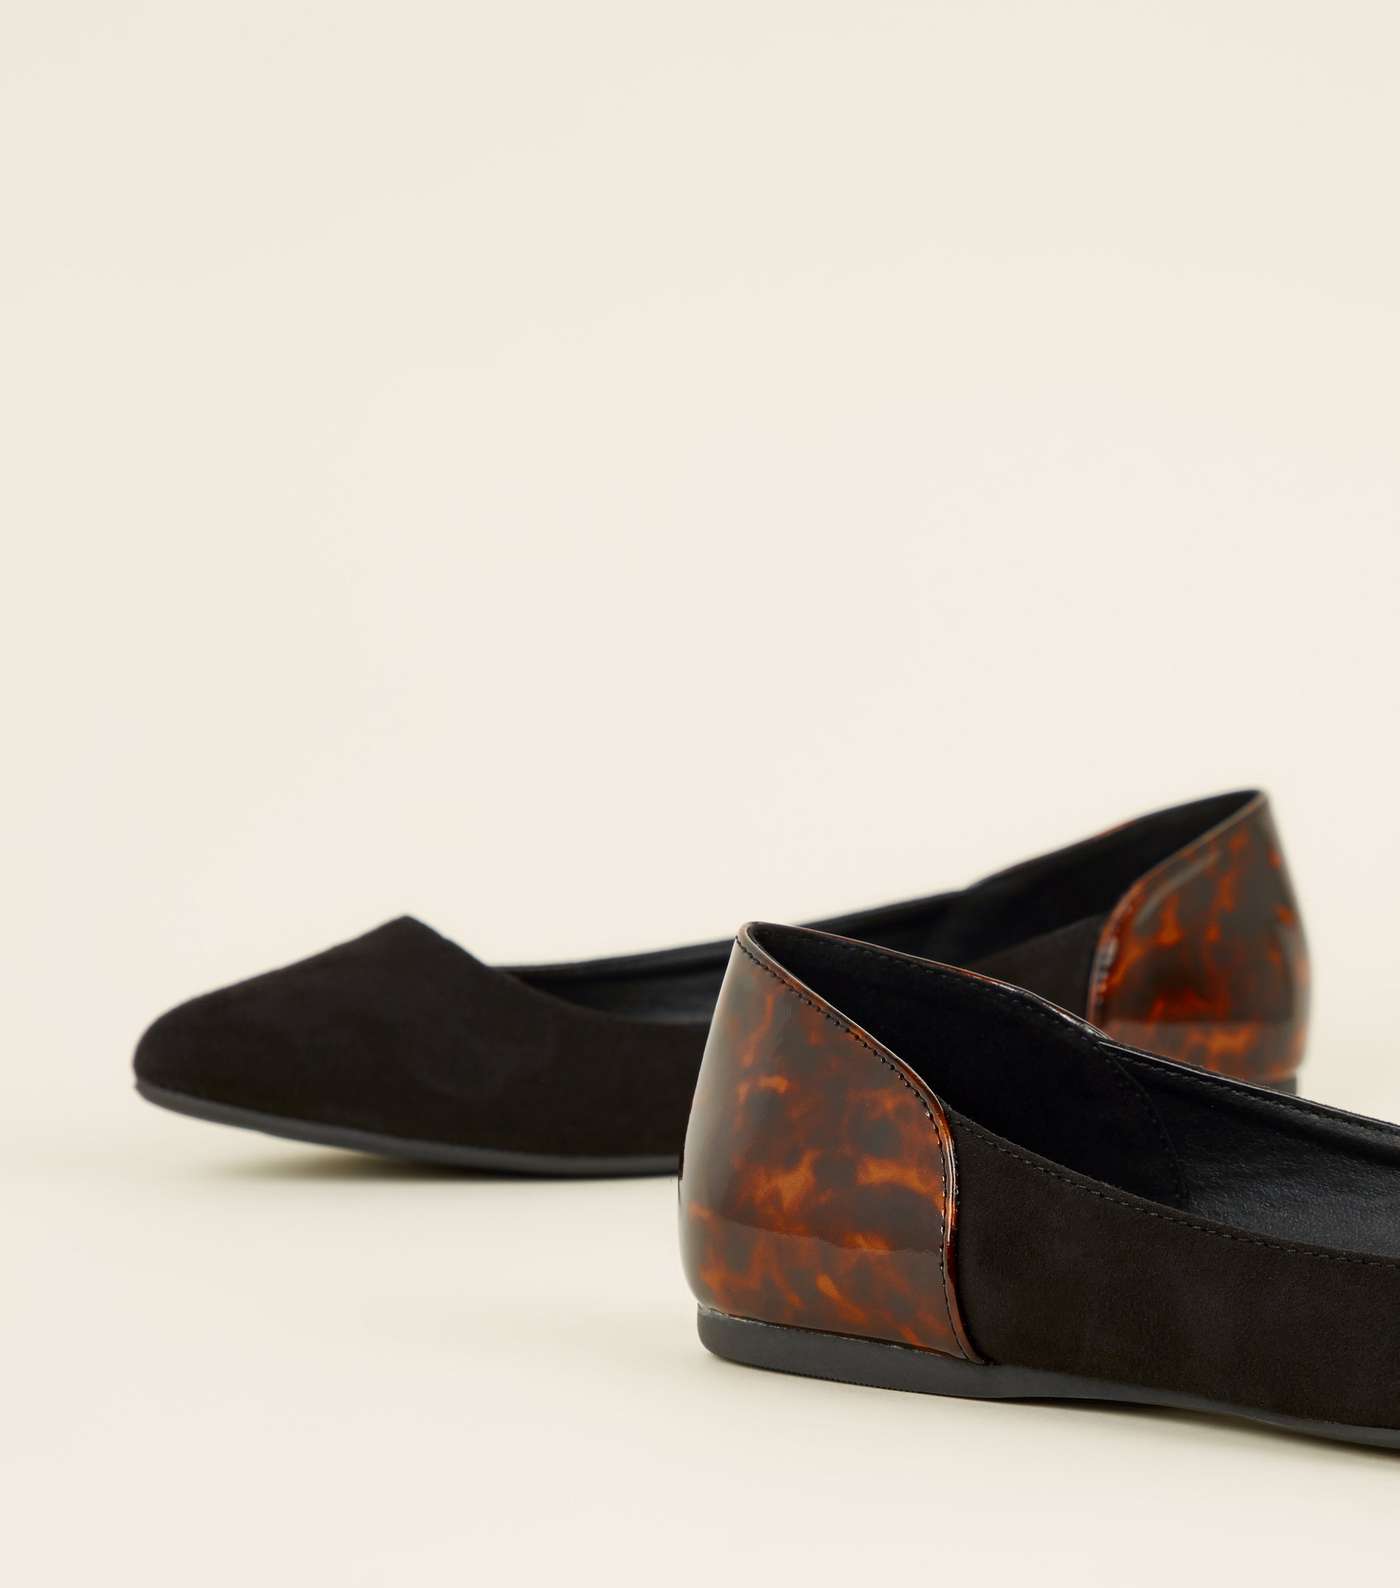 Wide Fit Black and Patent Tortoiseshell Pumps Image 4